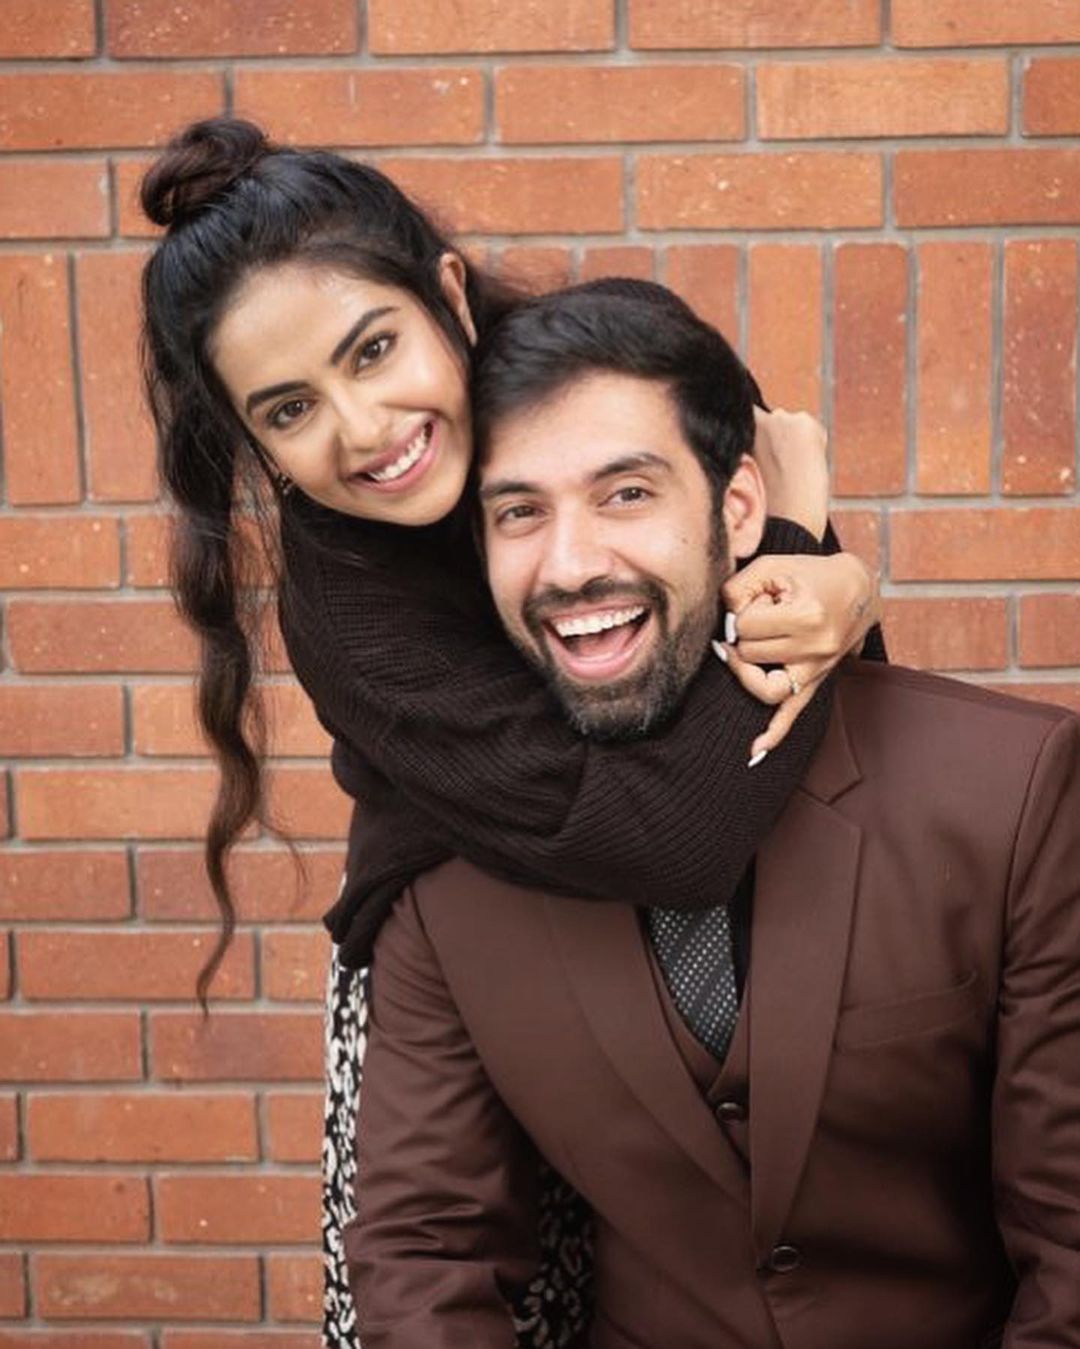 Avika Gor is seen here with her boyfriend Milind Chandwani for a photoshoot. Both look cute together in this picture. (Image: Instagram)